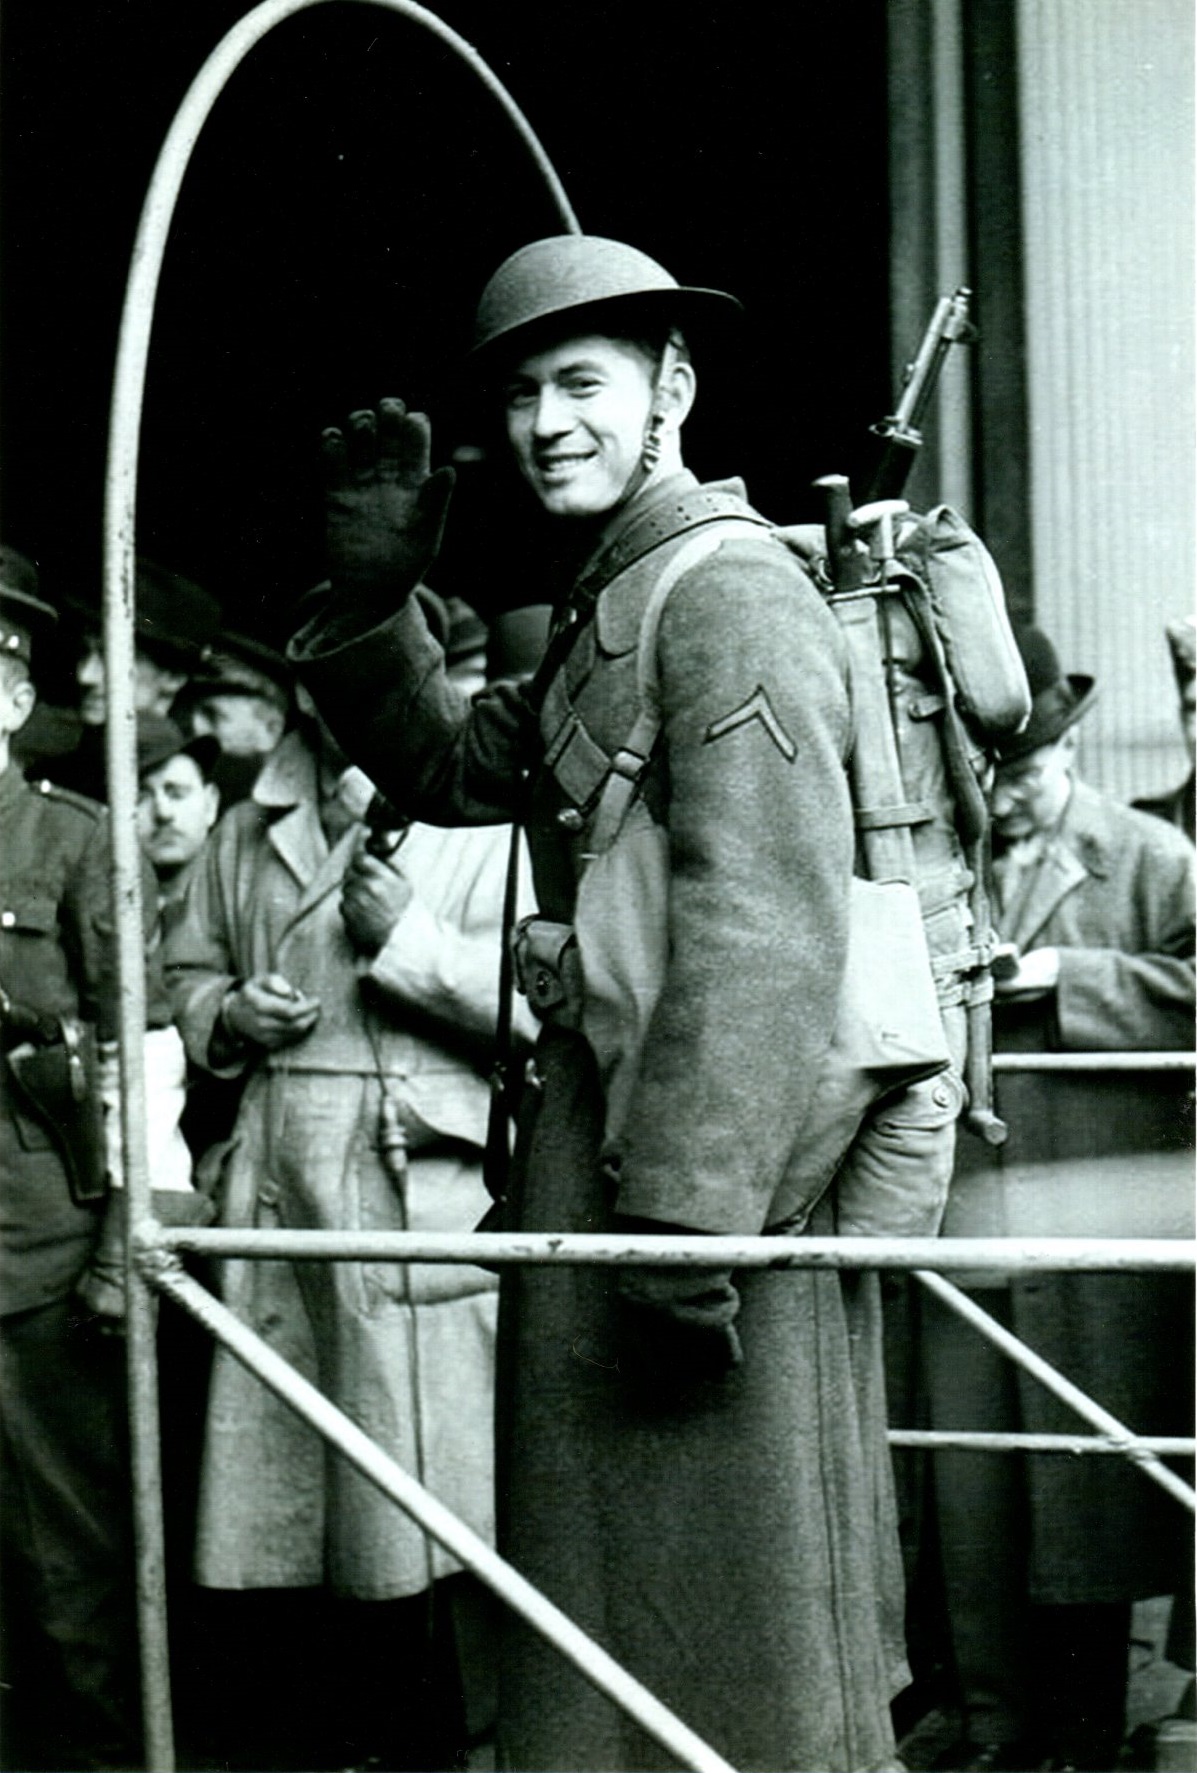 Black and white photo of a soldier waving from the gangplank of a ship with soldiers in the background.